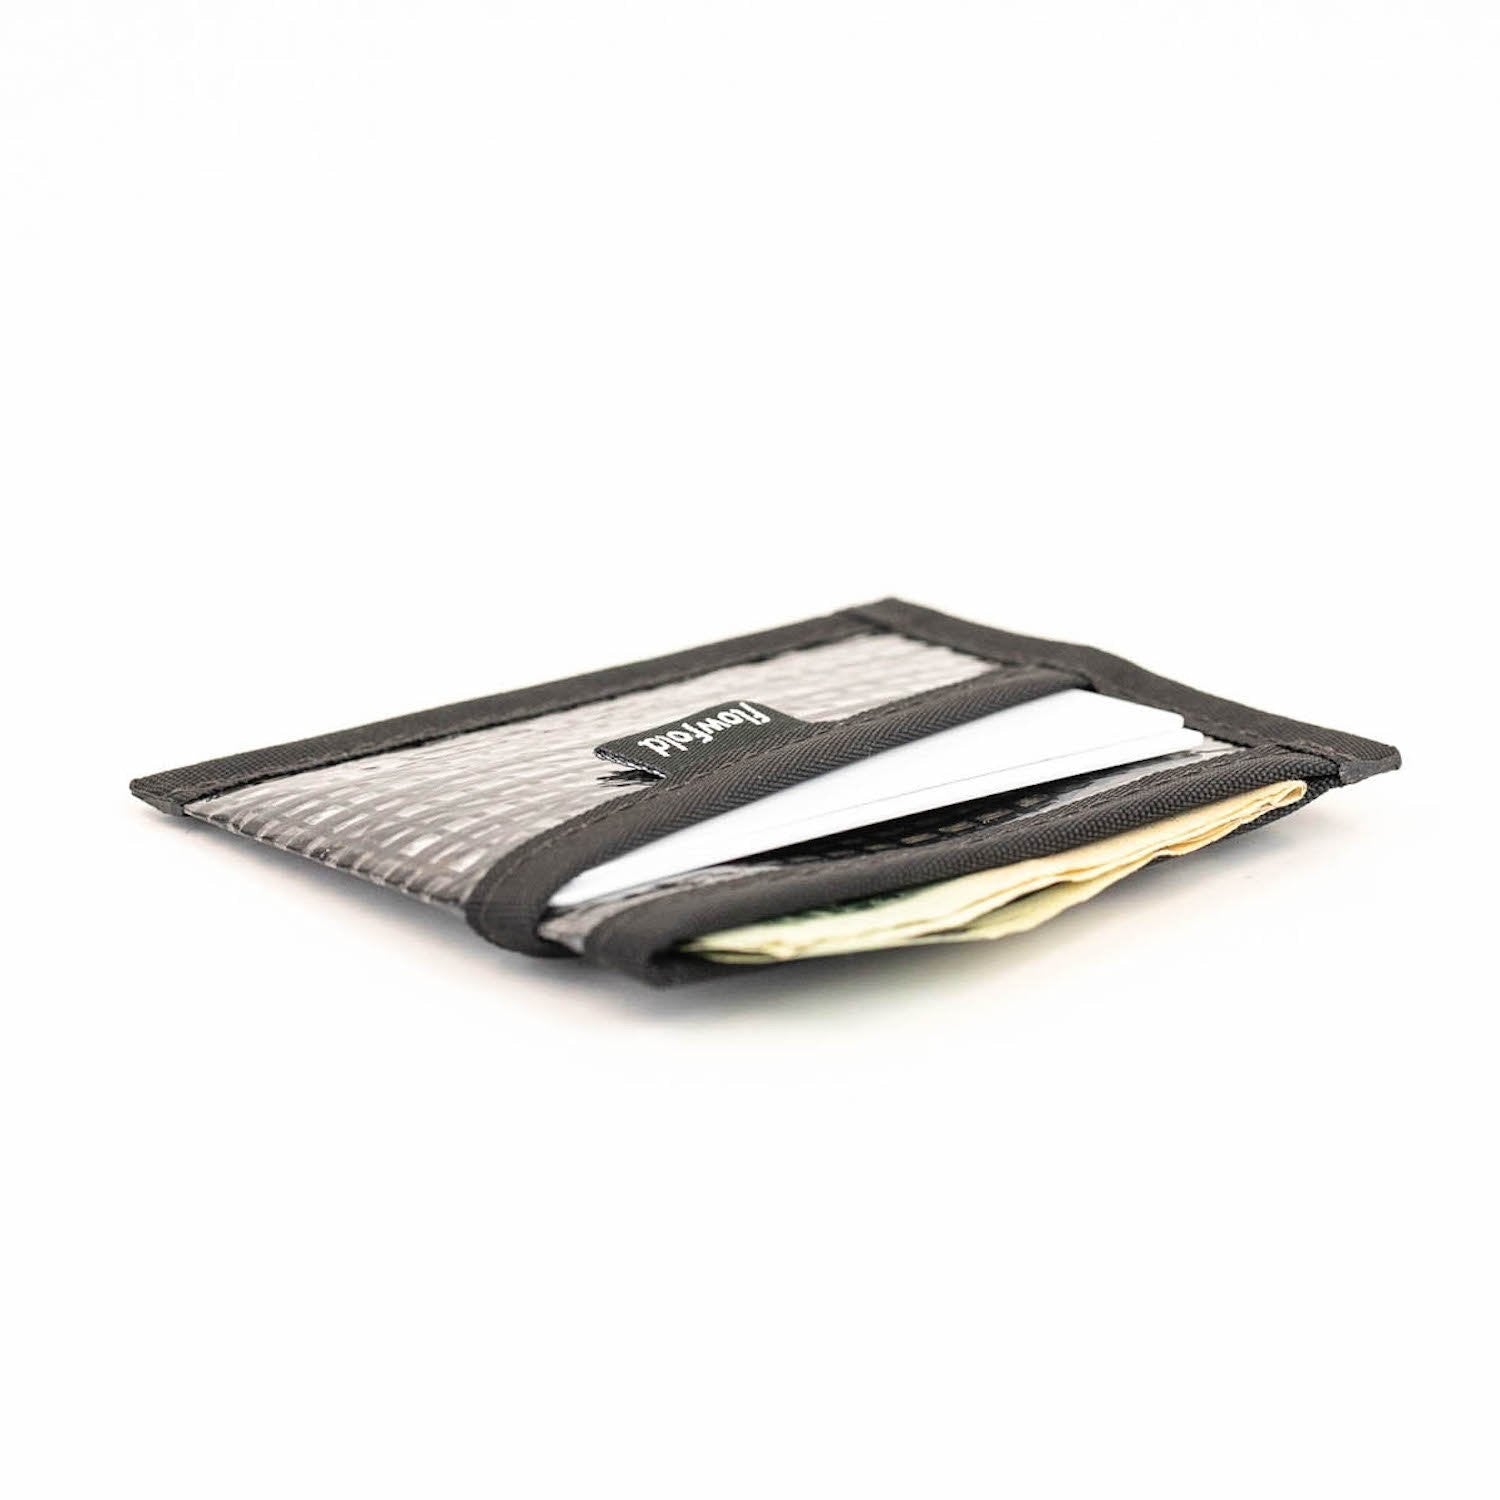 Flowfold | Recycled Sailcloth Craftsman Three Pocket Wallet - Black Pearl, Wallet, Flowfold, Defiance Outdoor Gear Co.